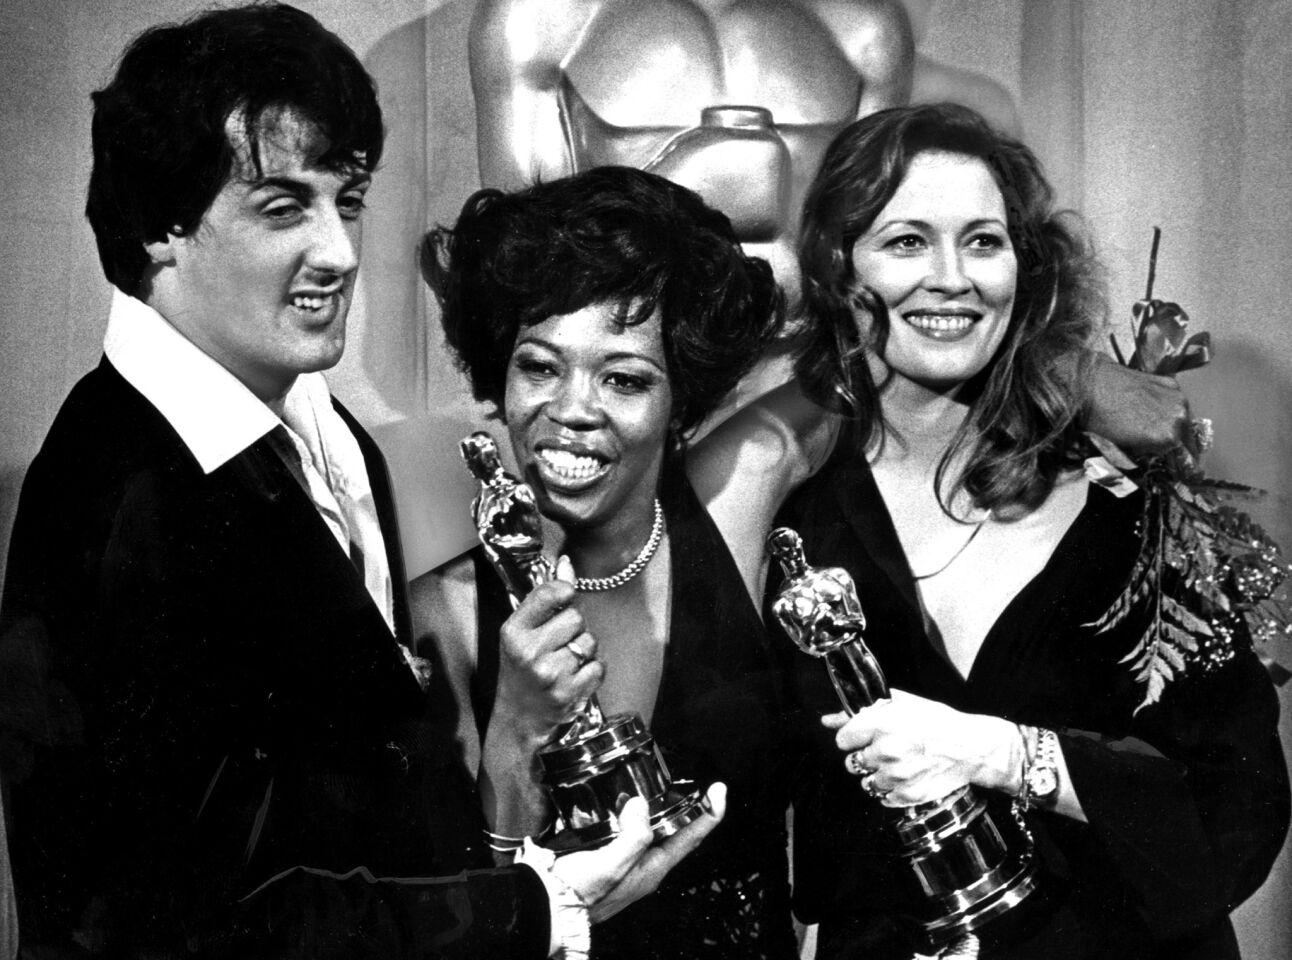 Writer-actor Sylvester Stallone, star of the Oscar-winning film "Rocky," congratulates Peter Finch's widow, Eletha, center, after Finch was posthumously awarded the lead actor award at the 1977 Academy Awards. Faye Dunaway, right, won for lead actress.